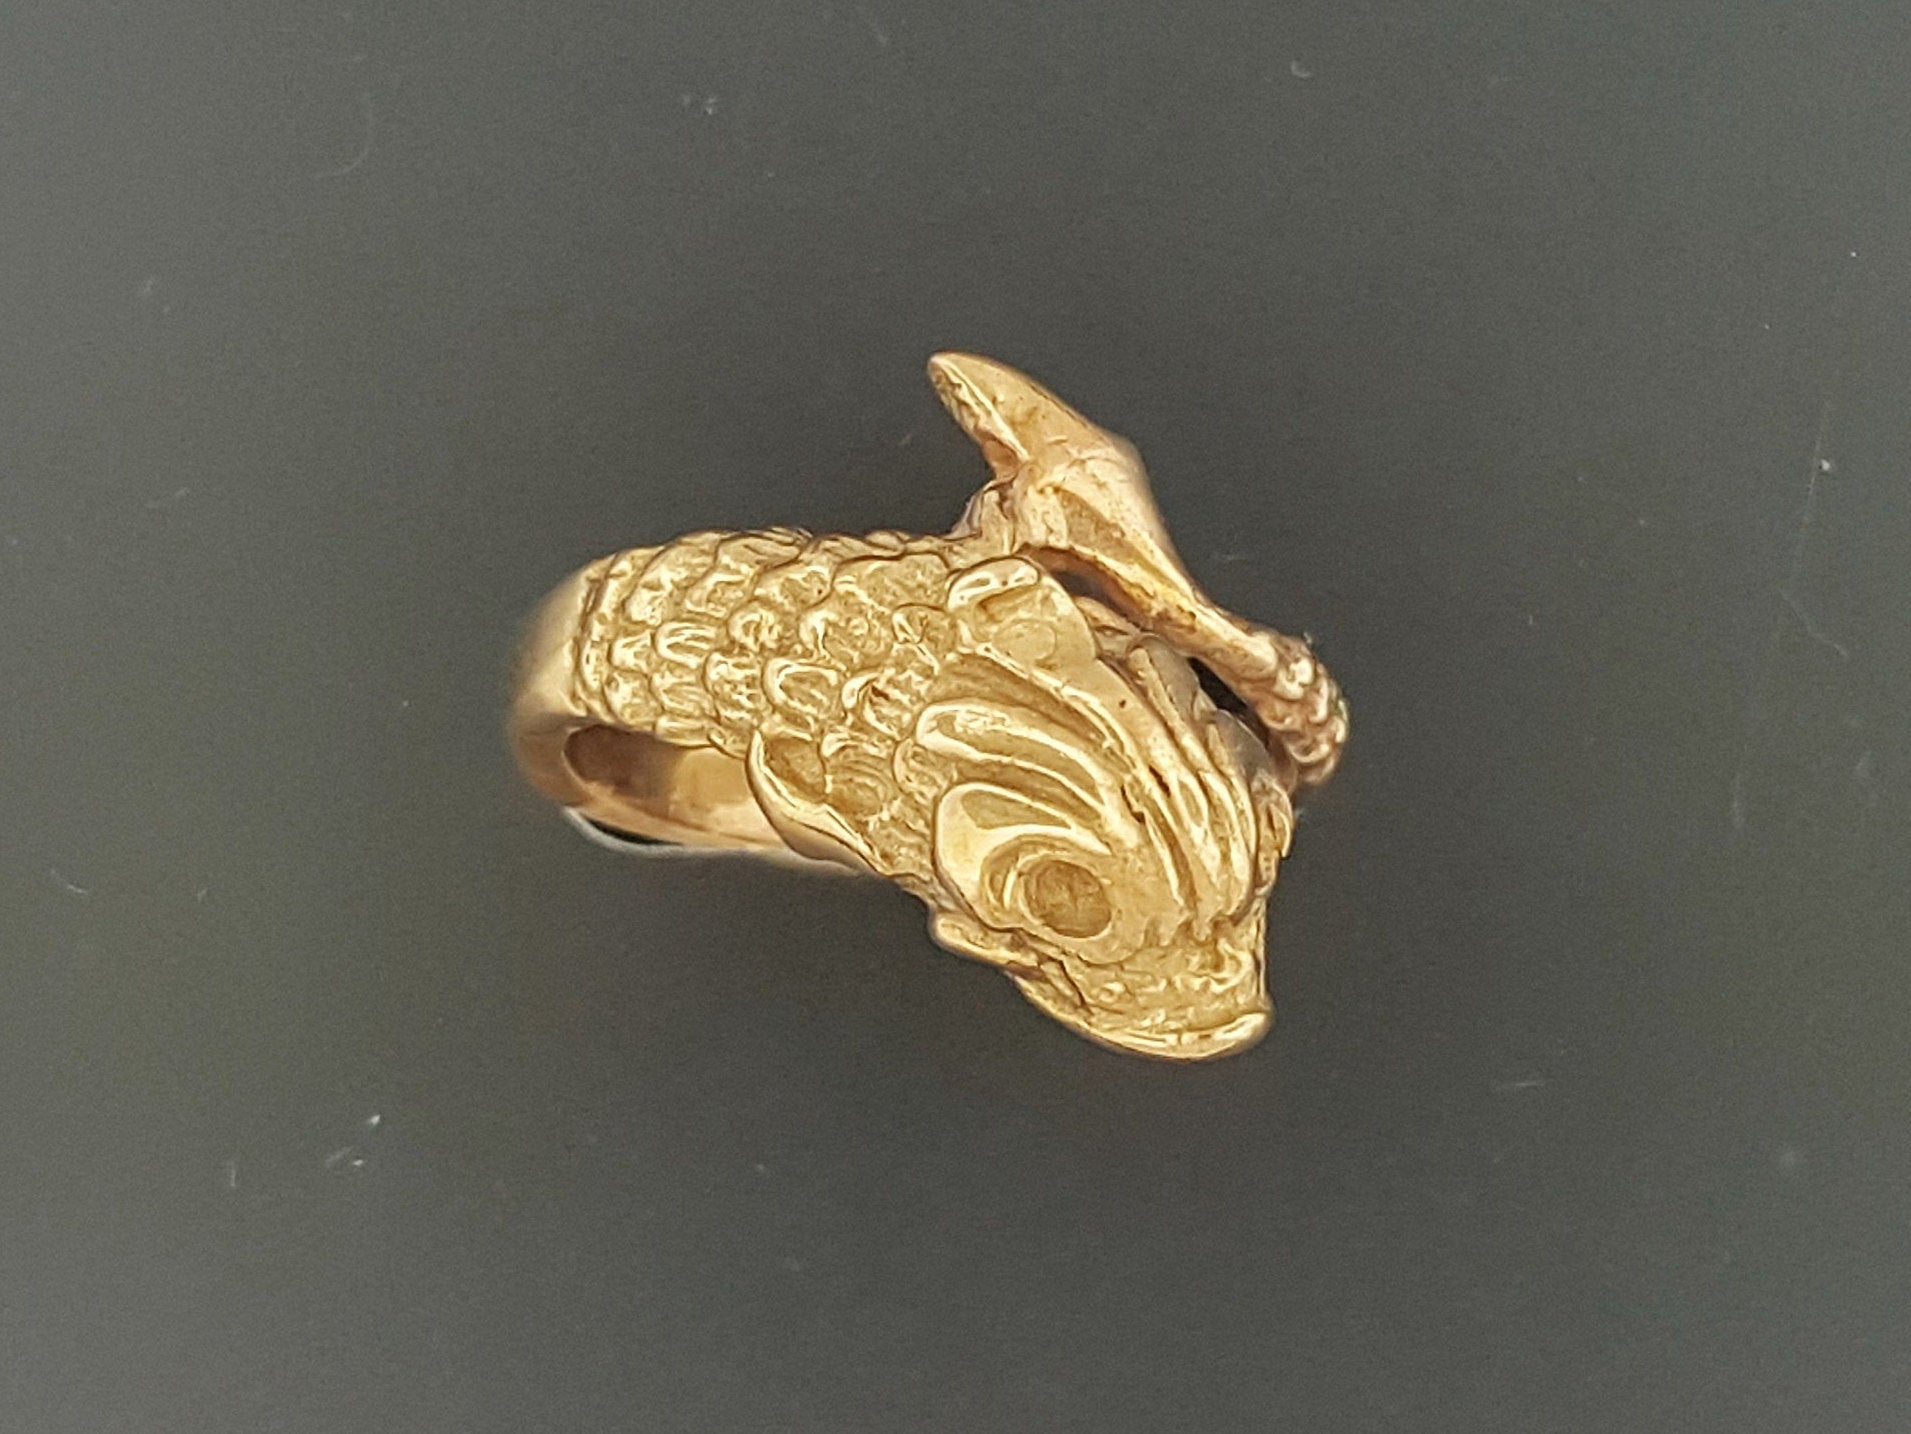 Vintage Stylized Koi Ring in Sterling Silver or Antique Bronze, Sterling Silver Koi Ring, Antique Bronze Koi Ring, Silver Goldfish Ring, Bronze Goldfish Ring, 3D Koi Ring, 3D Fish Ring, Silver Fish Ring, Bronze Fish Ring, Good Luck Ring, Lucky Fish Ring, Good Luck Koi Ring, Koi Ring In Sterling Silver, Koi Ring In Antique Bronze